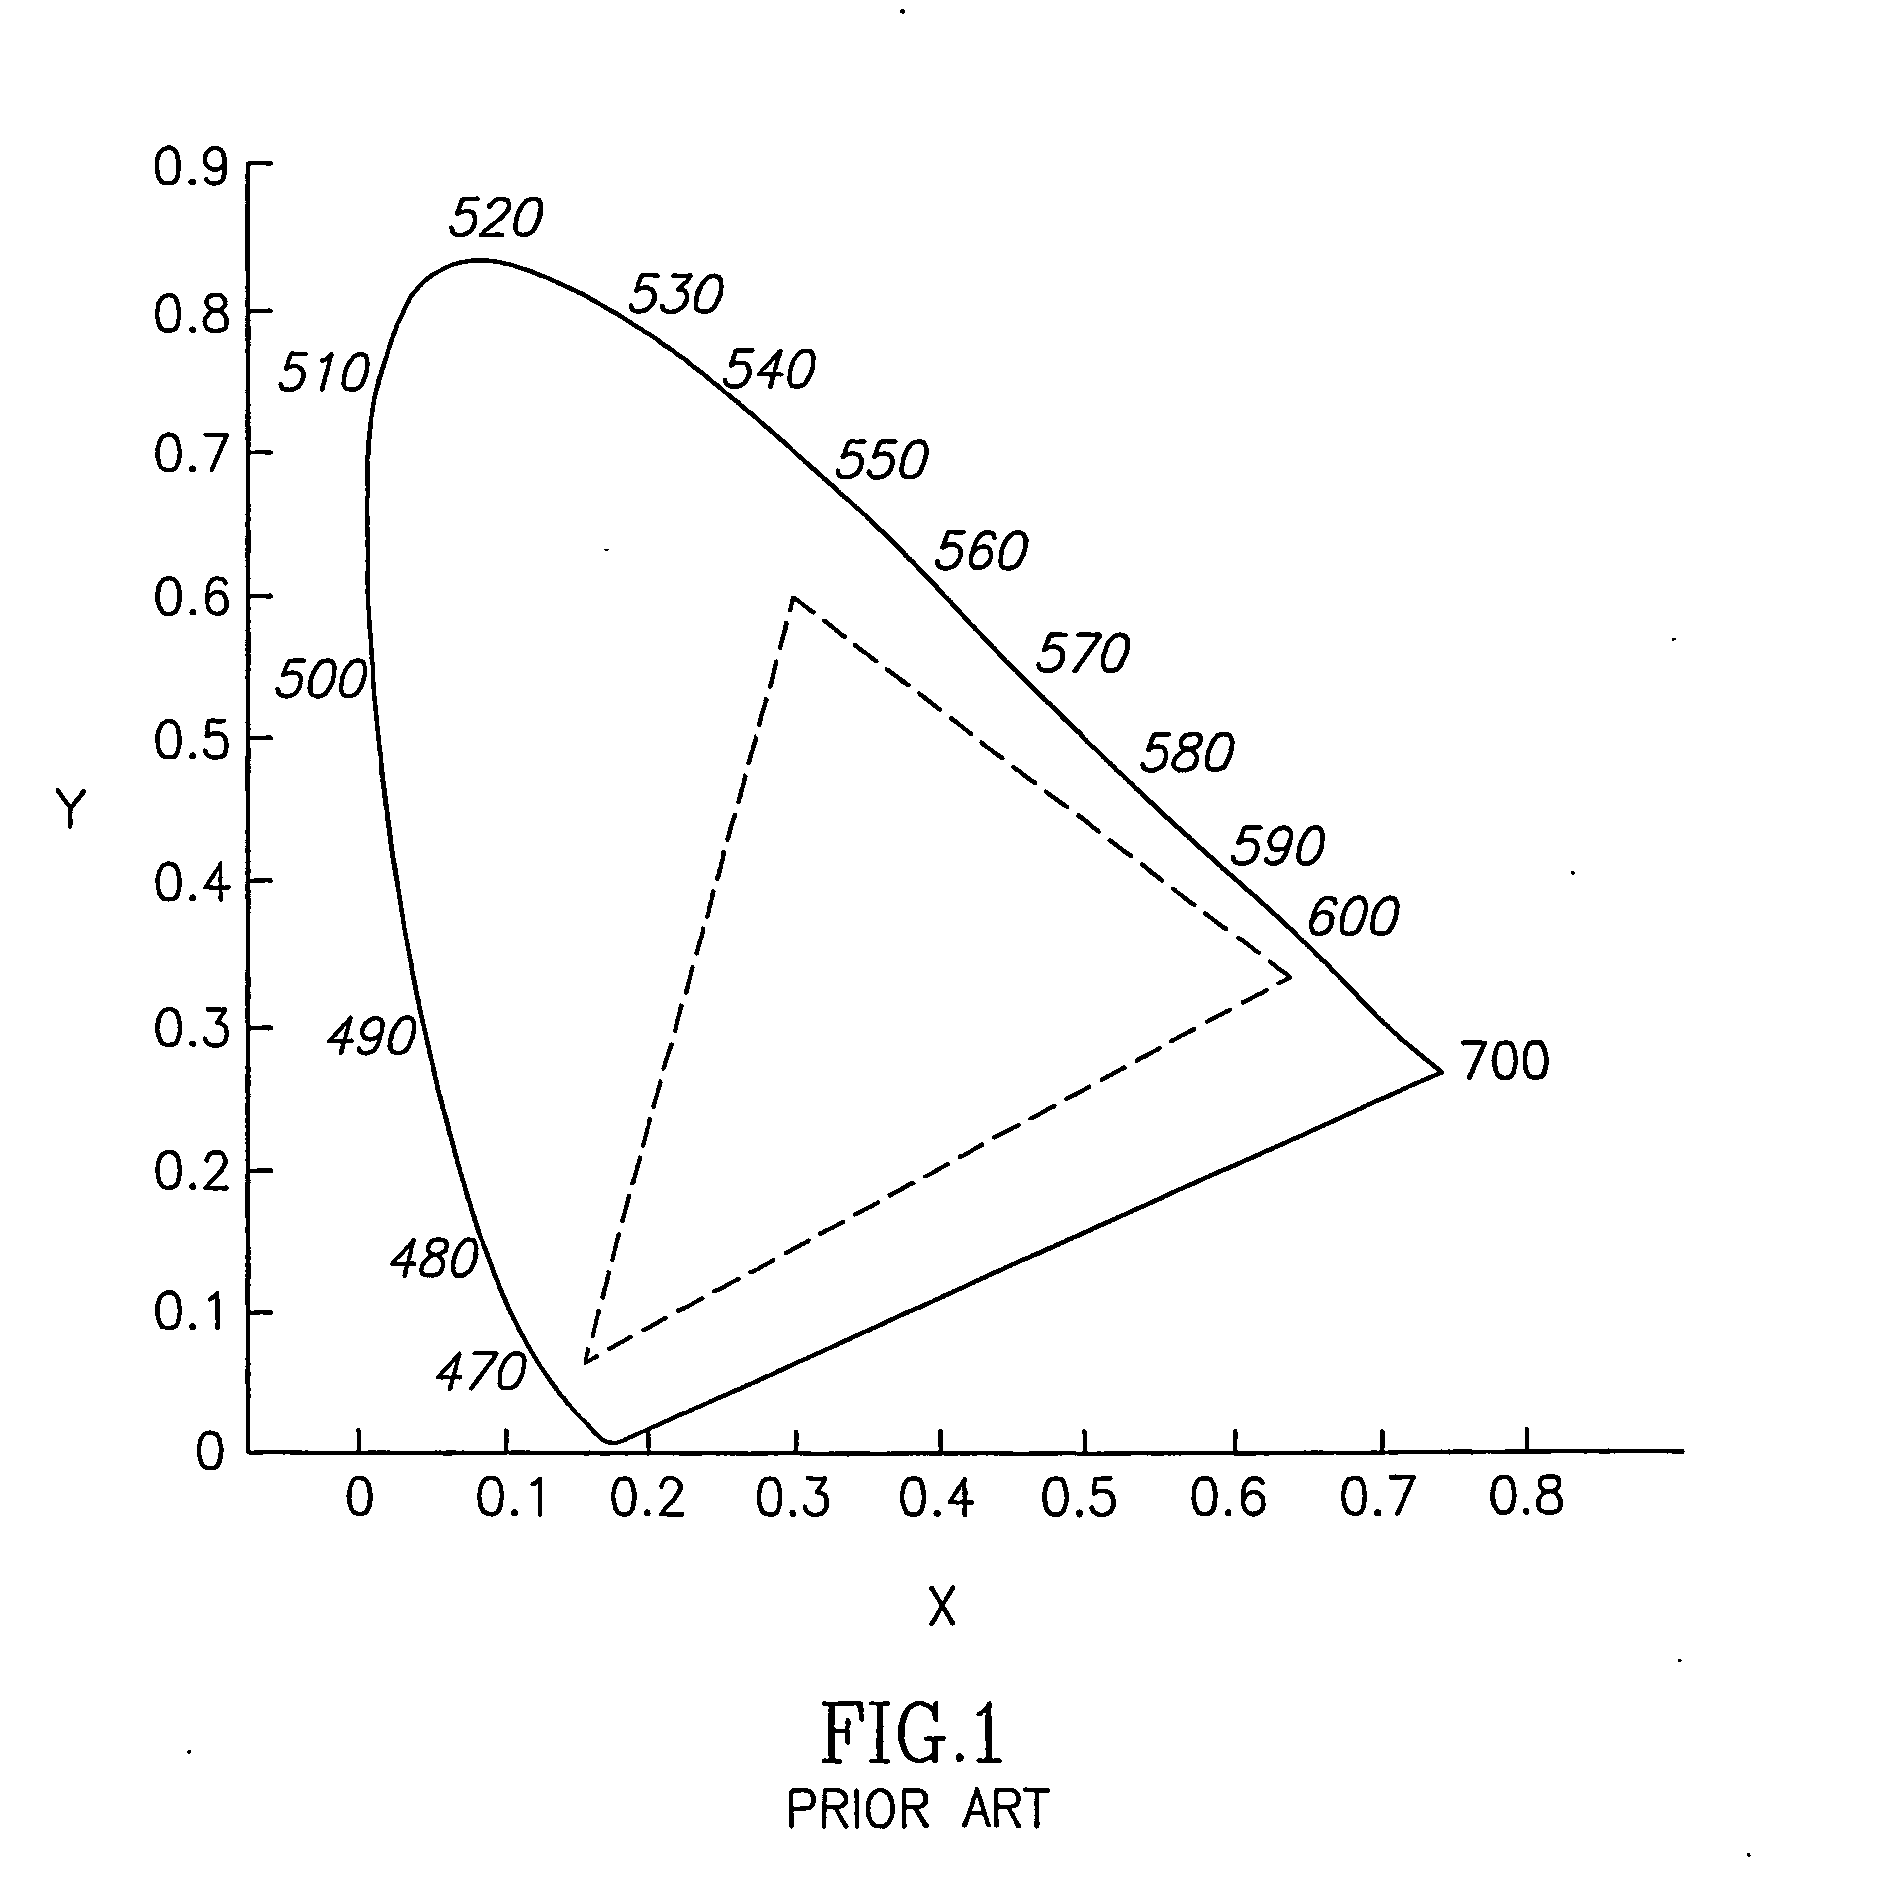 Multi-primary display with spectrally adapted back-illumination